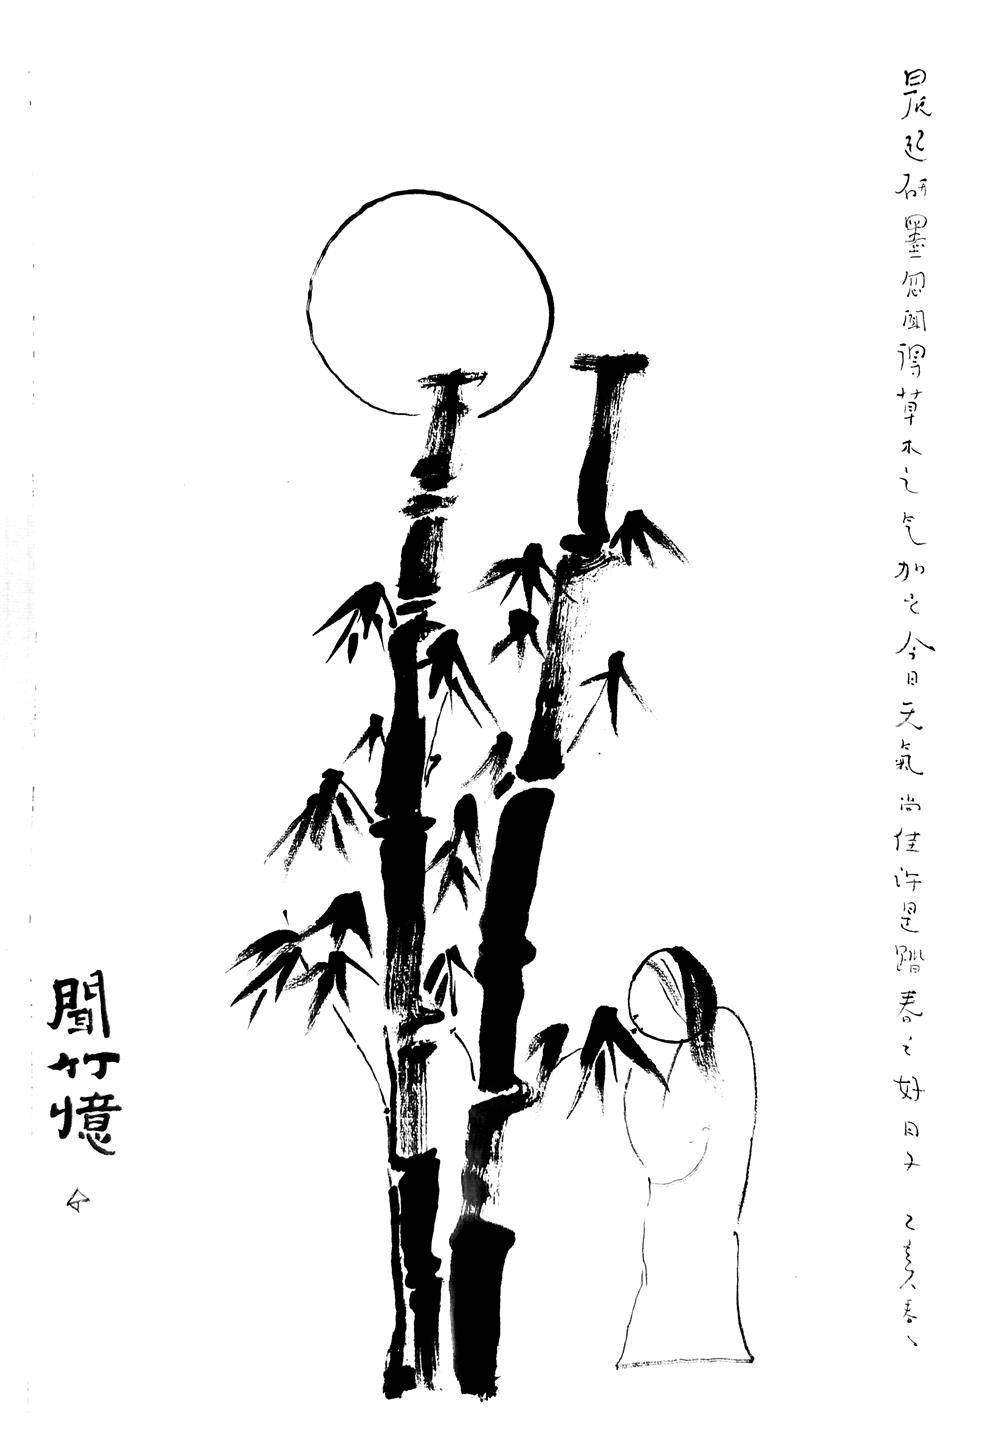 About the Artwork Anusman (wang Shuo) Smelling Bamboo 2019 Ink on Ricepaper 50×33cm  by Anusman (Wang Shuo)